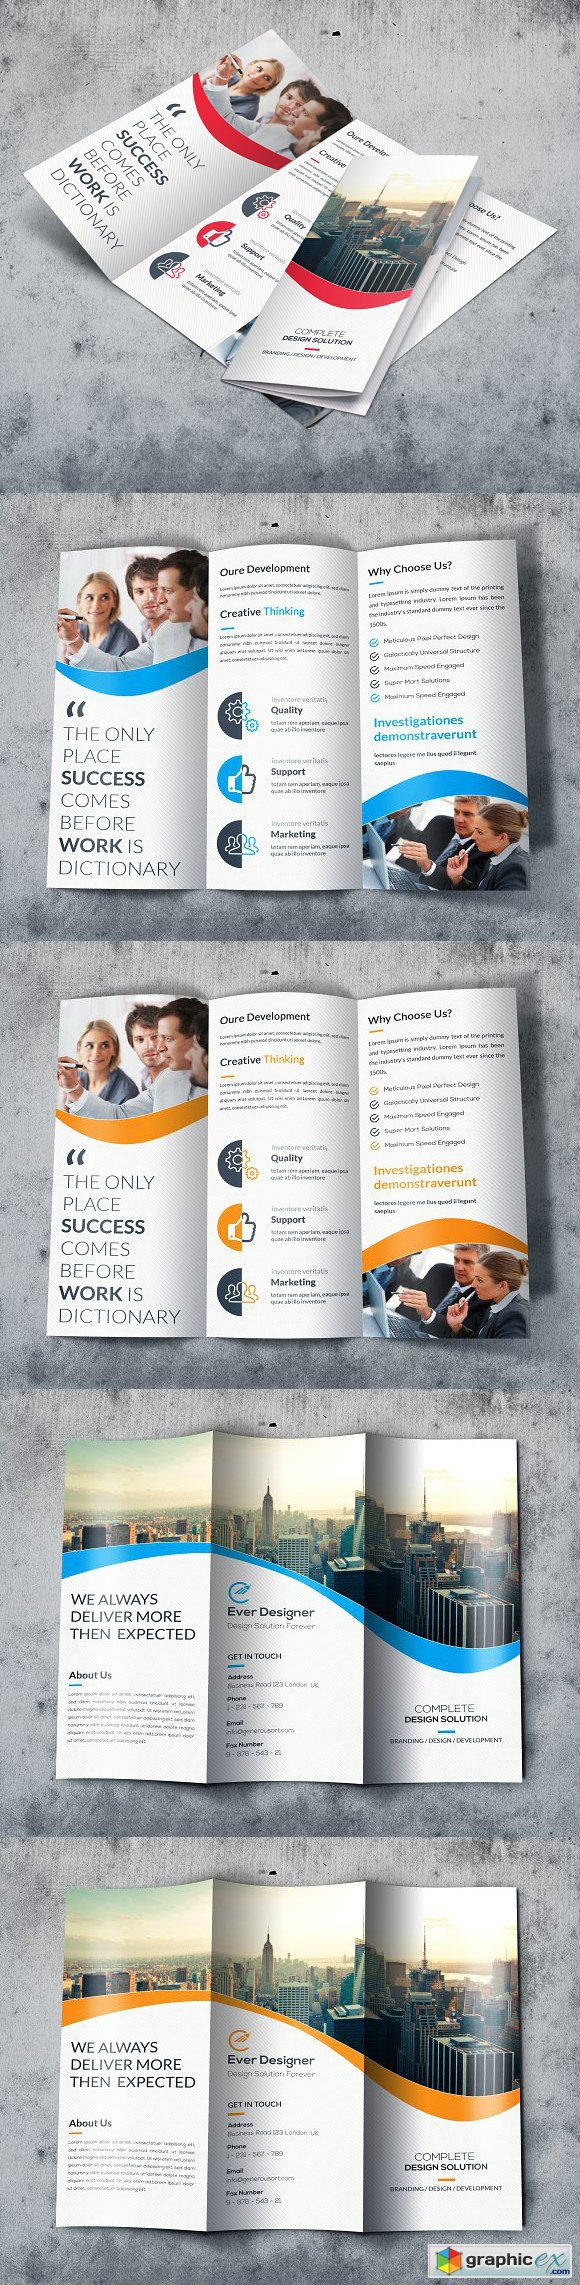 Business Trifold Brochures